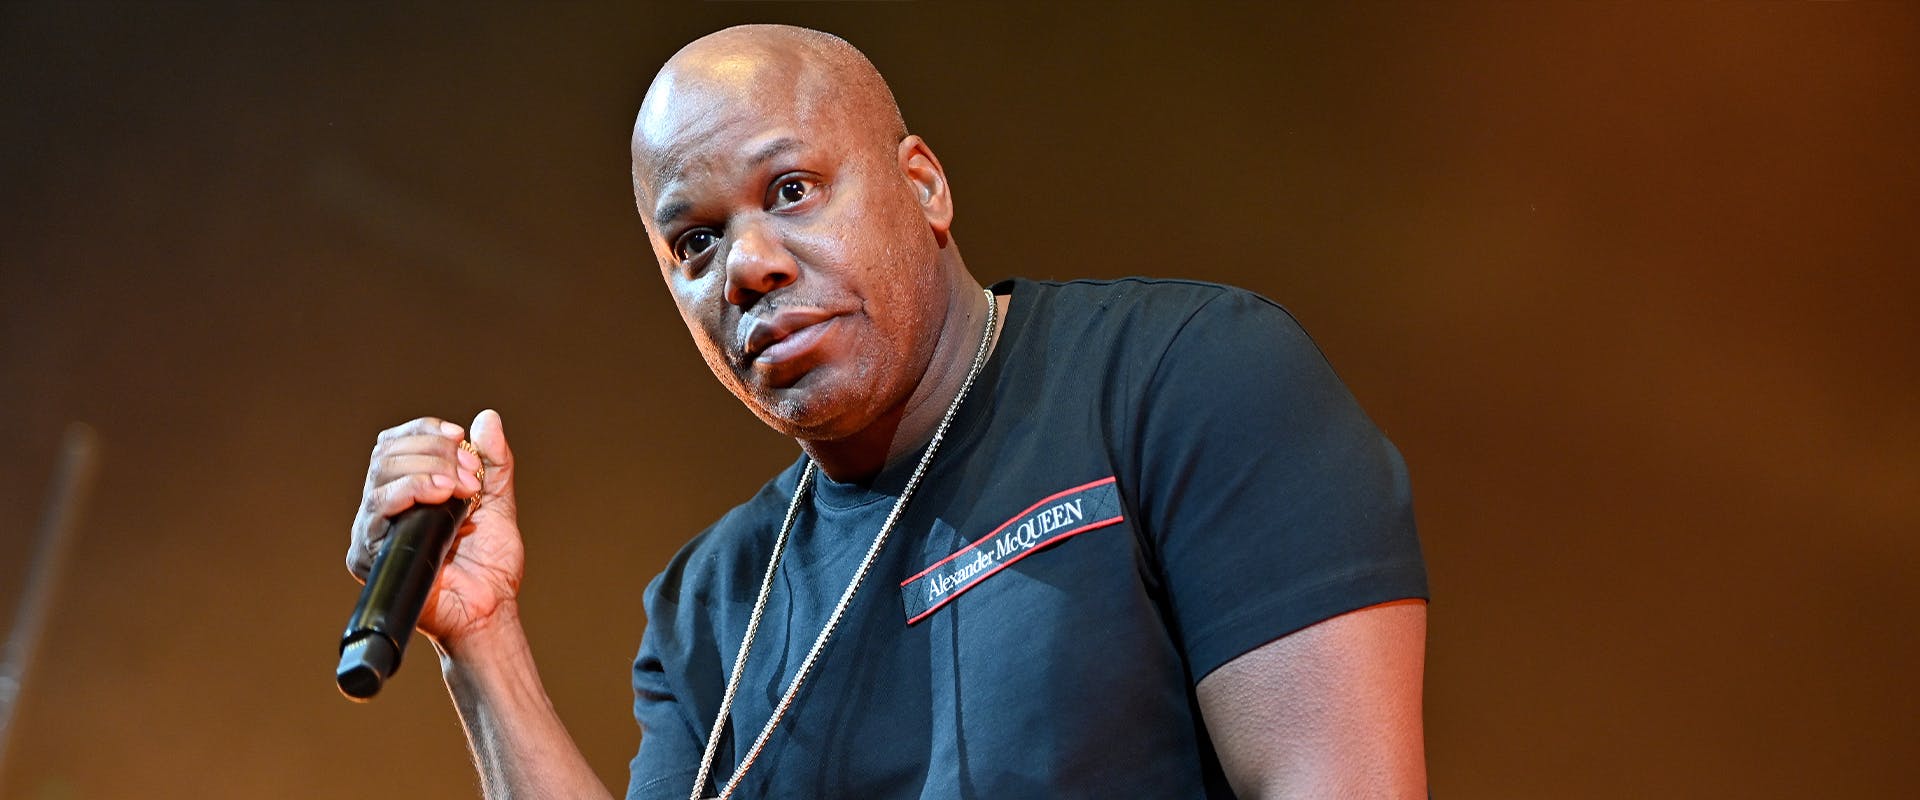 Too $hort Debuted His 'Freaky Tales' Film at the Sundance Film